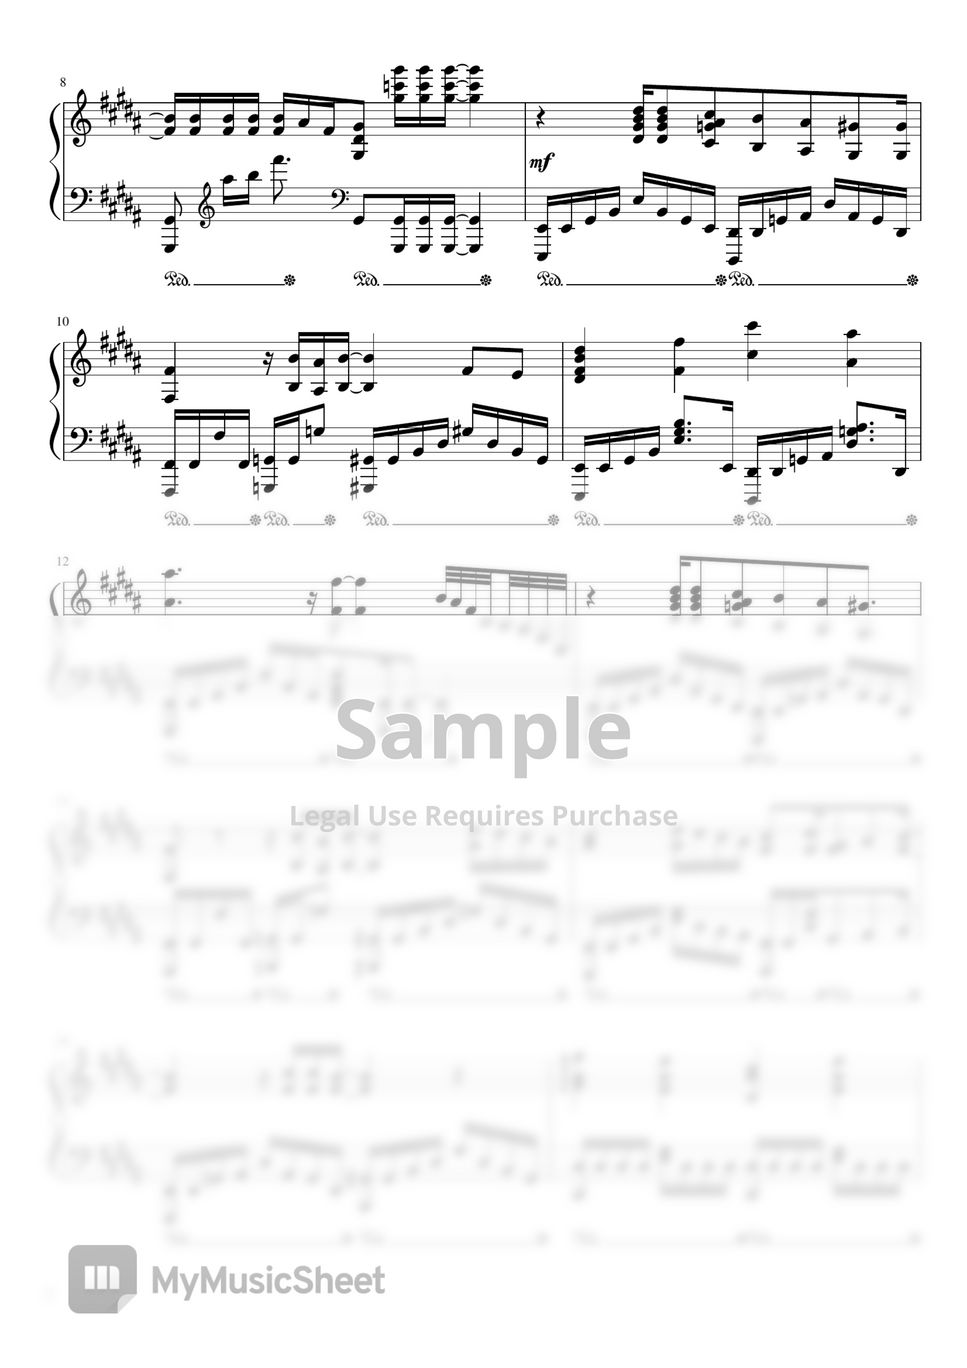 Gt&Vo - FLY HIGH!! (Haikyuu!! Season 2 OP 2 - For Piano Solo) Sheets by poon